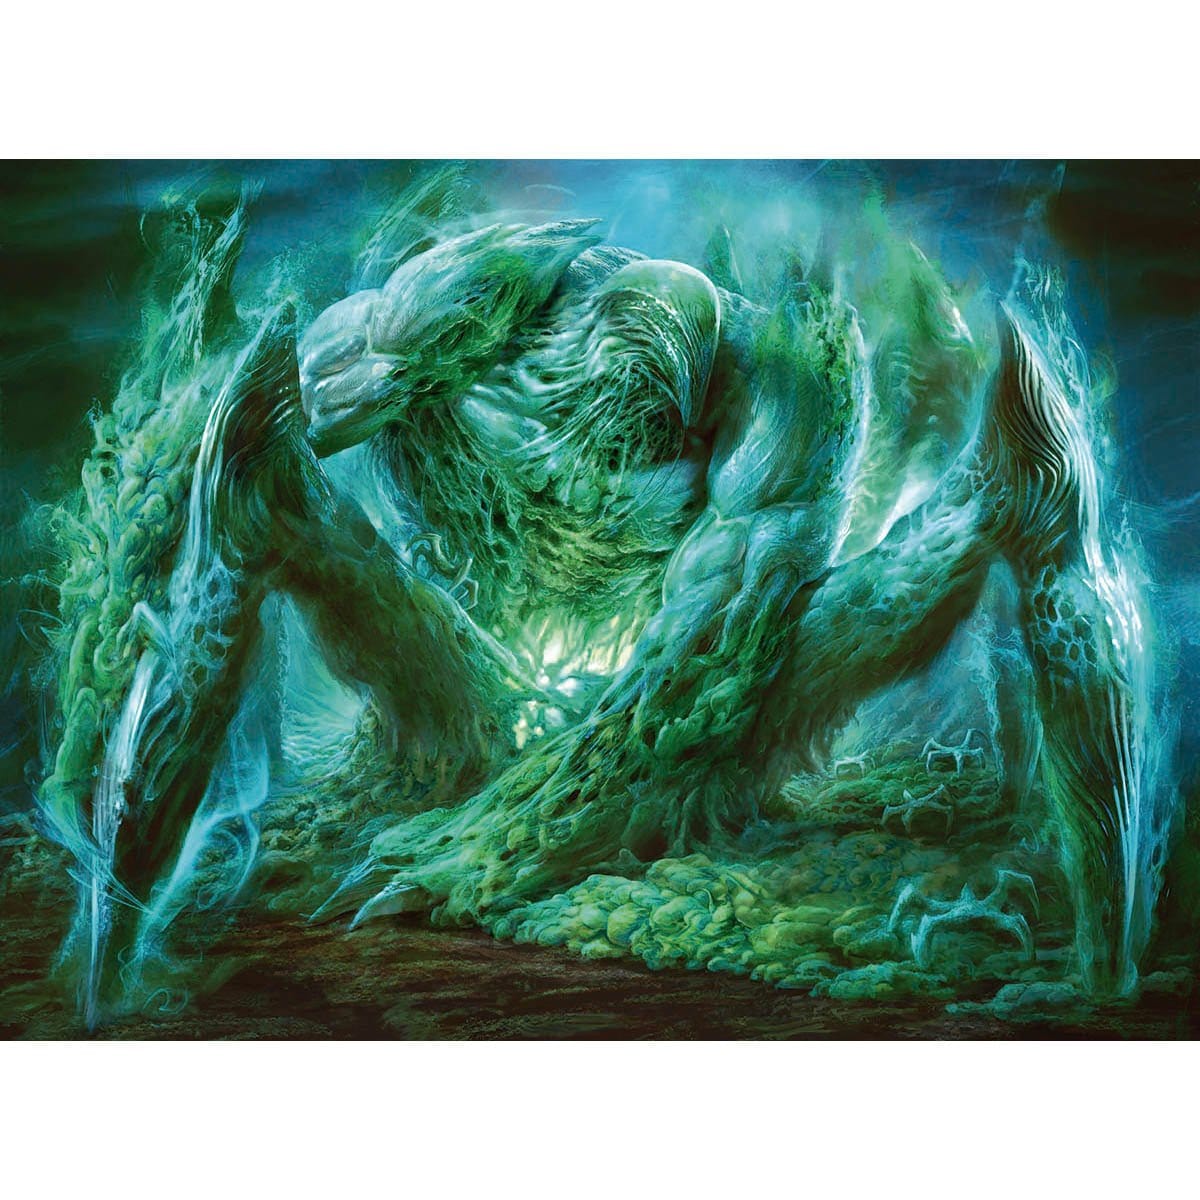 Ixidron Print - Print - Original Magic Art - Accessories for Magic the Gathering and other card games